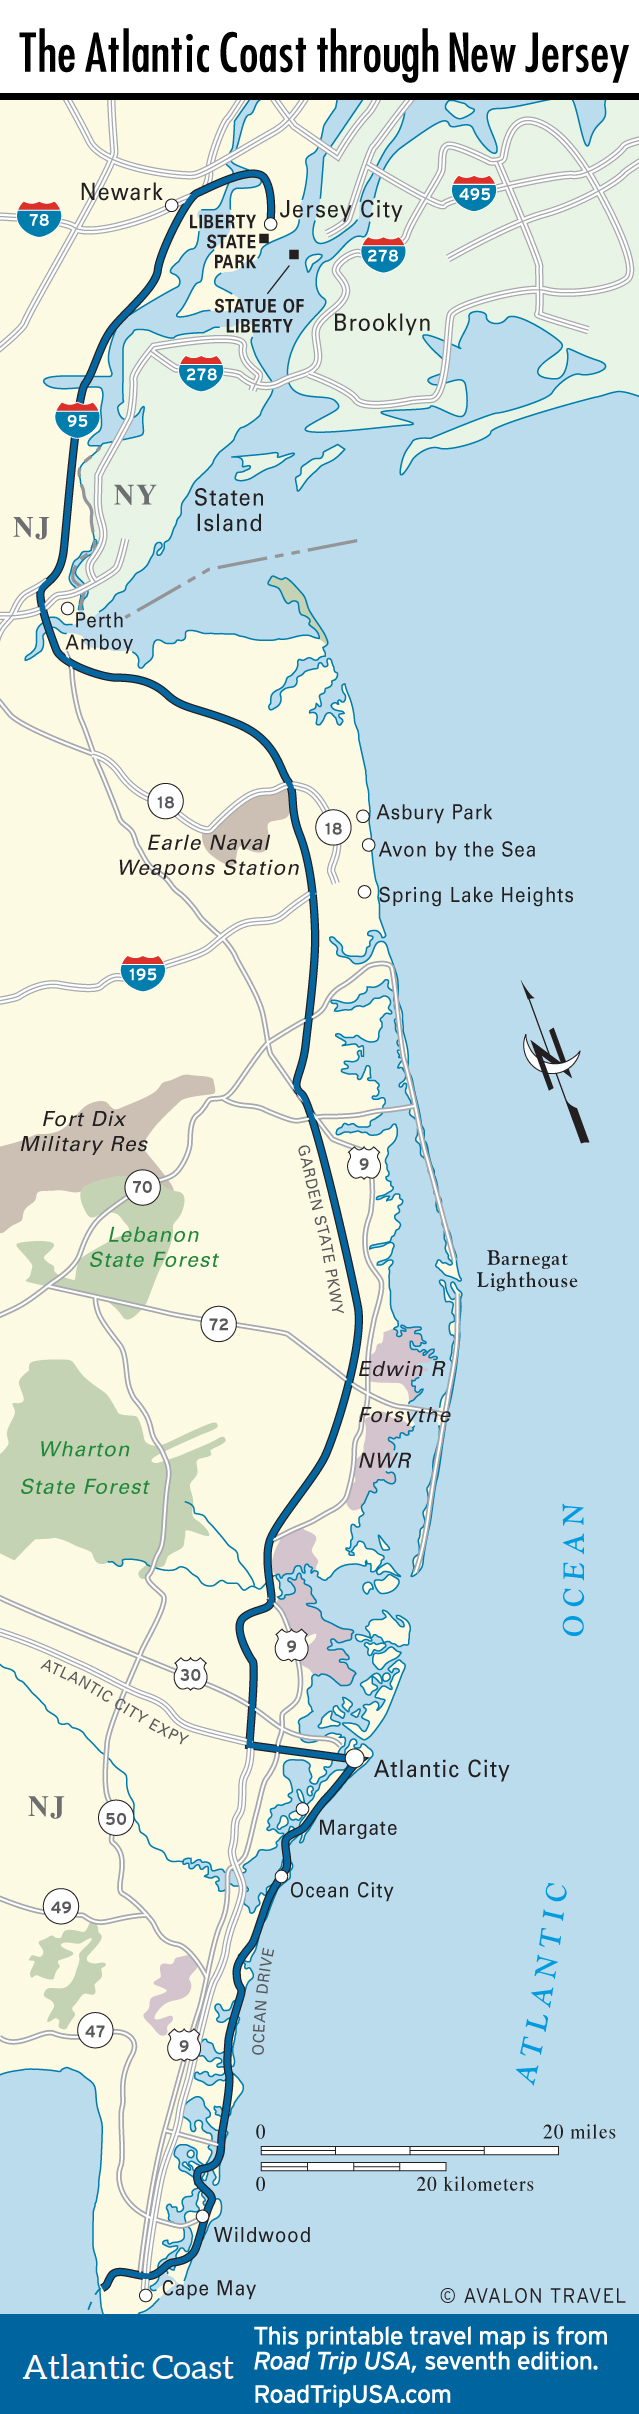 The Atlantic Coast Route Through New Jersey Road Trip Usa